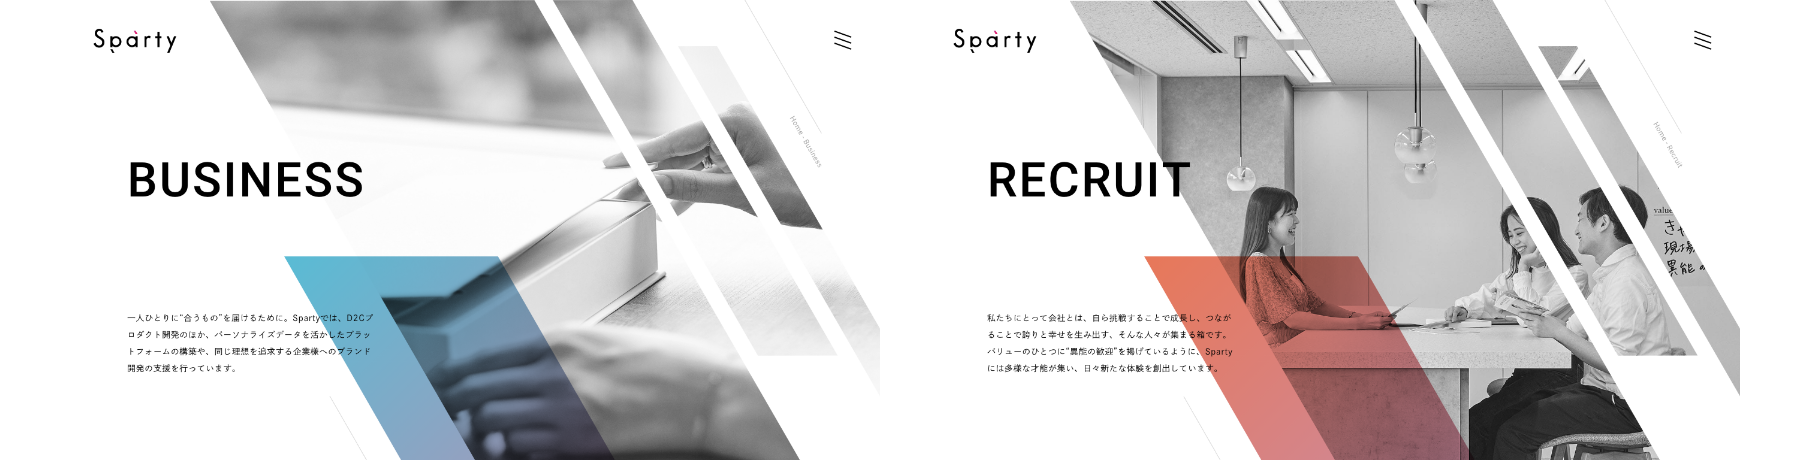 Sparty, Inc. / Corporate Website